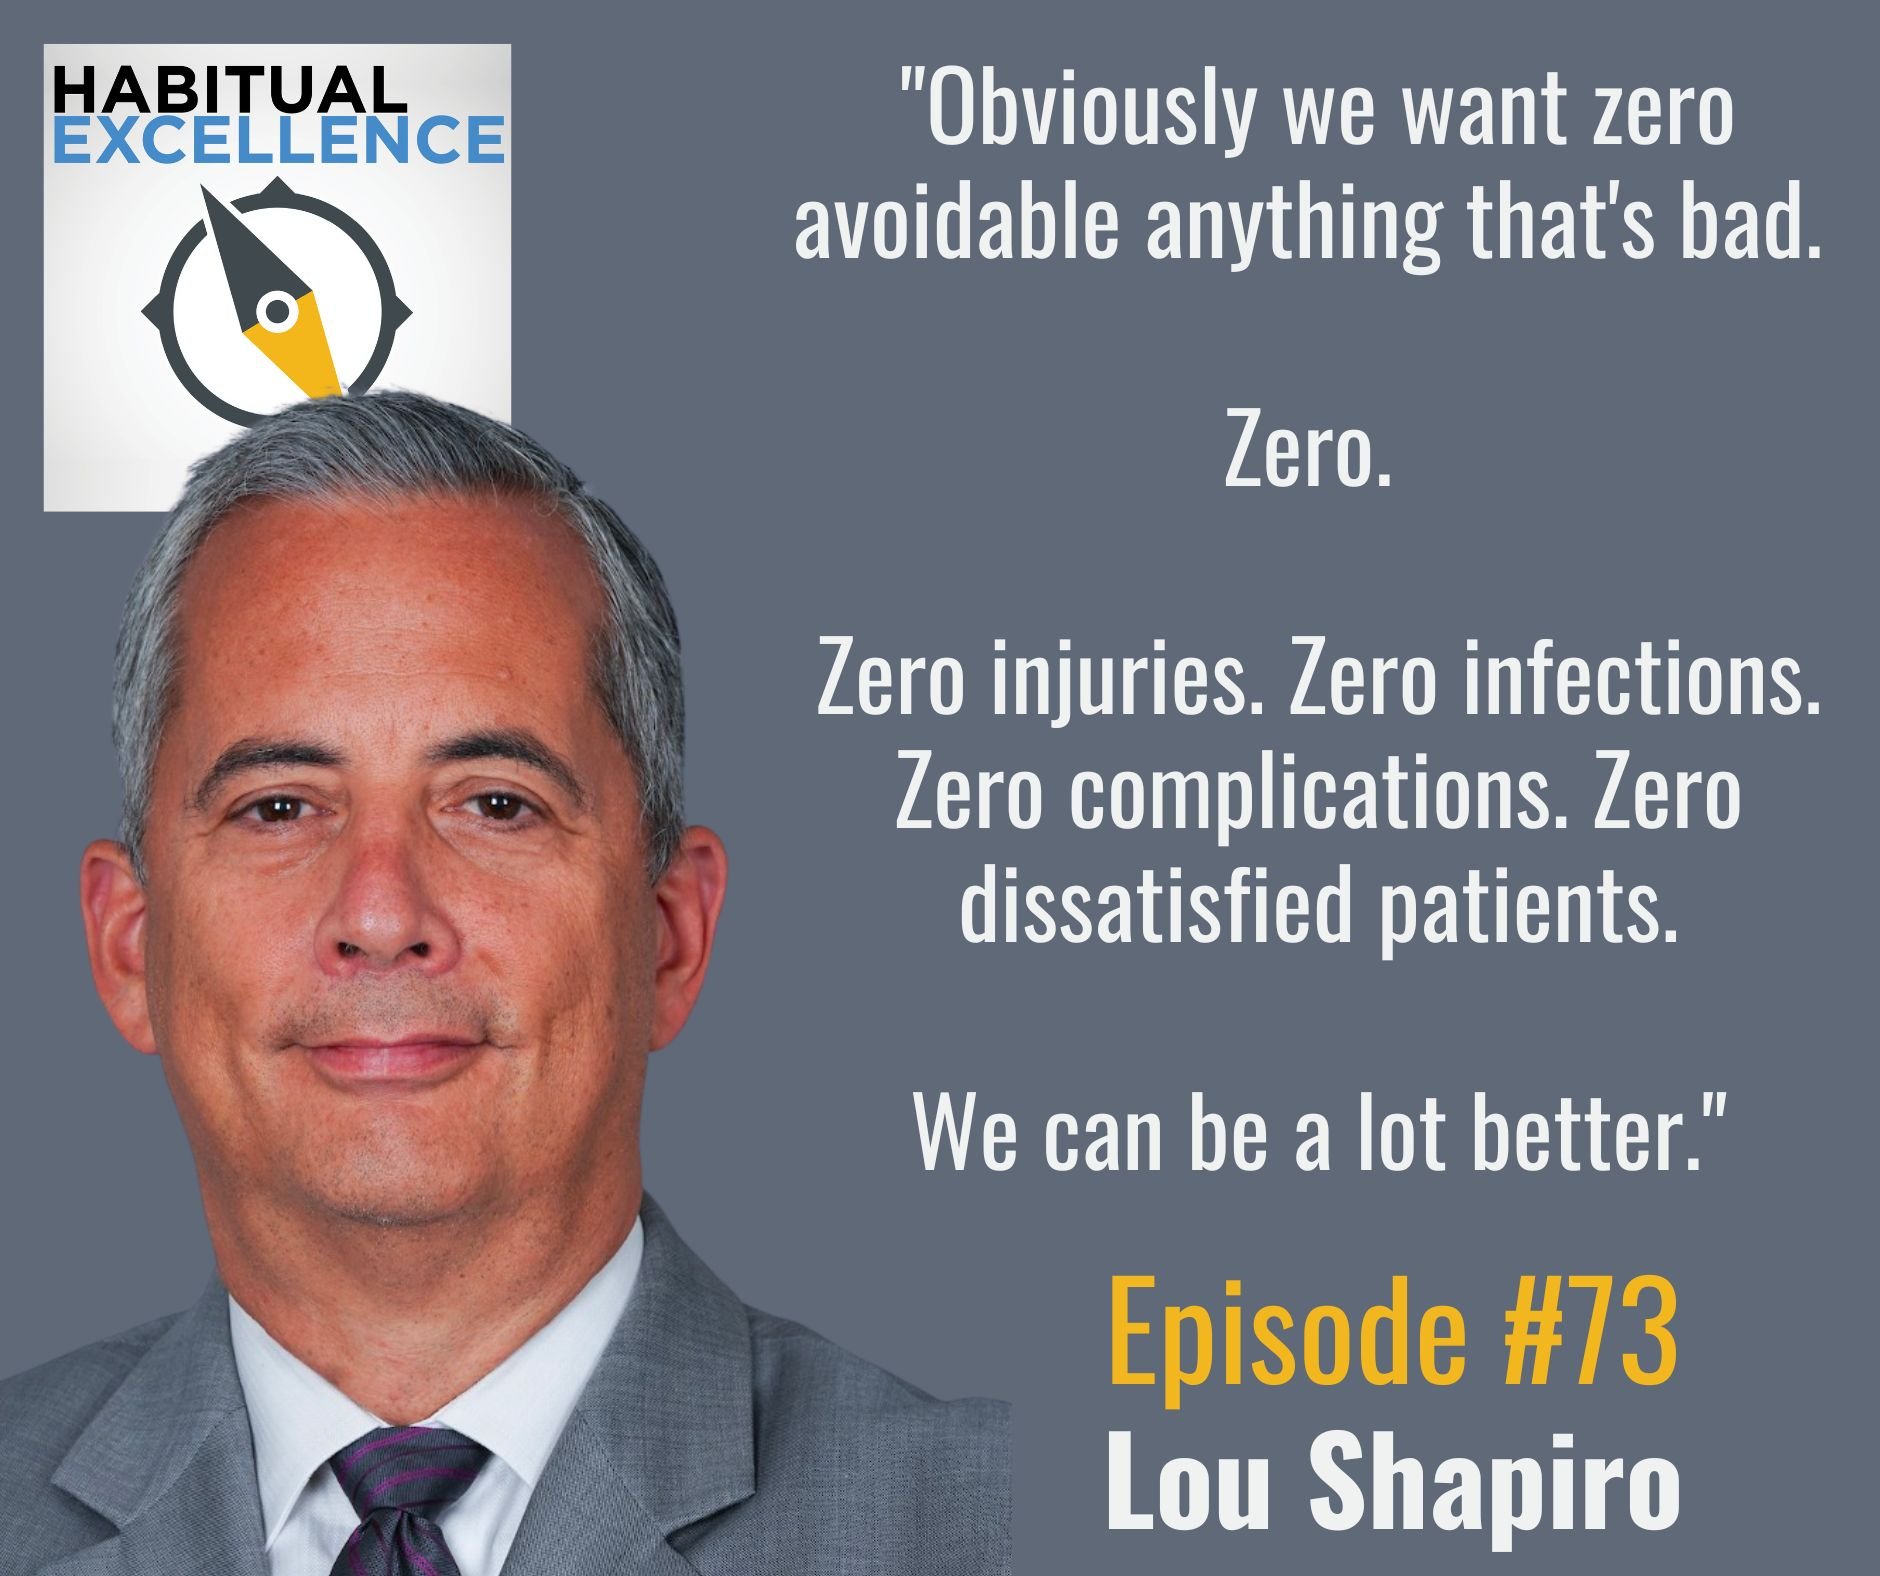 "Obviously we want zero avoidable anything that's bad.   Zero.   Zero injuries. Zero infections. Zero complications. Zero dissatisfied patients.  We can be a lot better."   Lou Shapiro